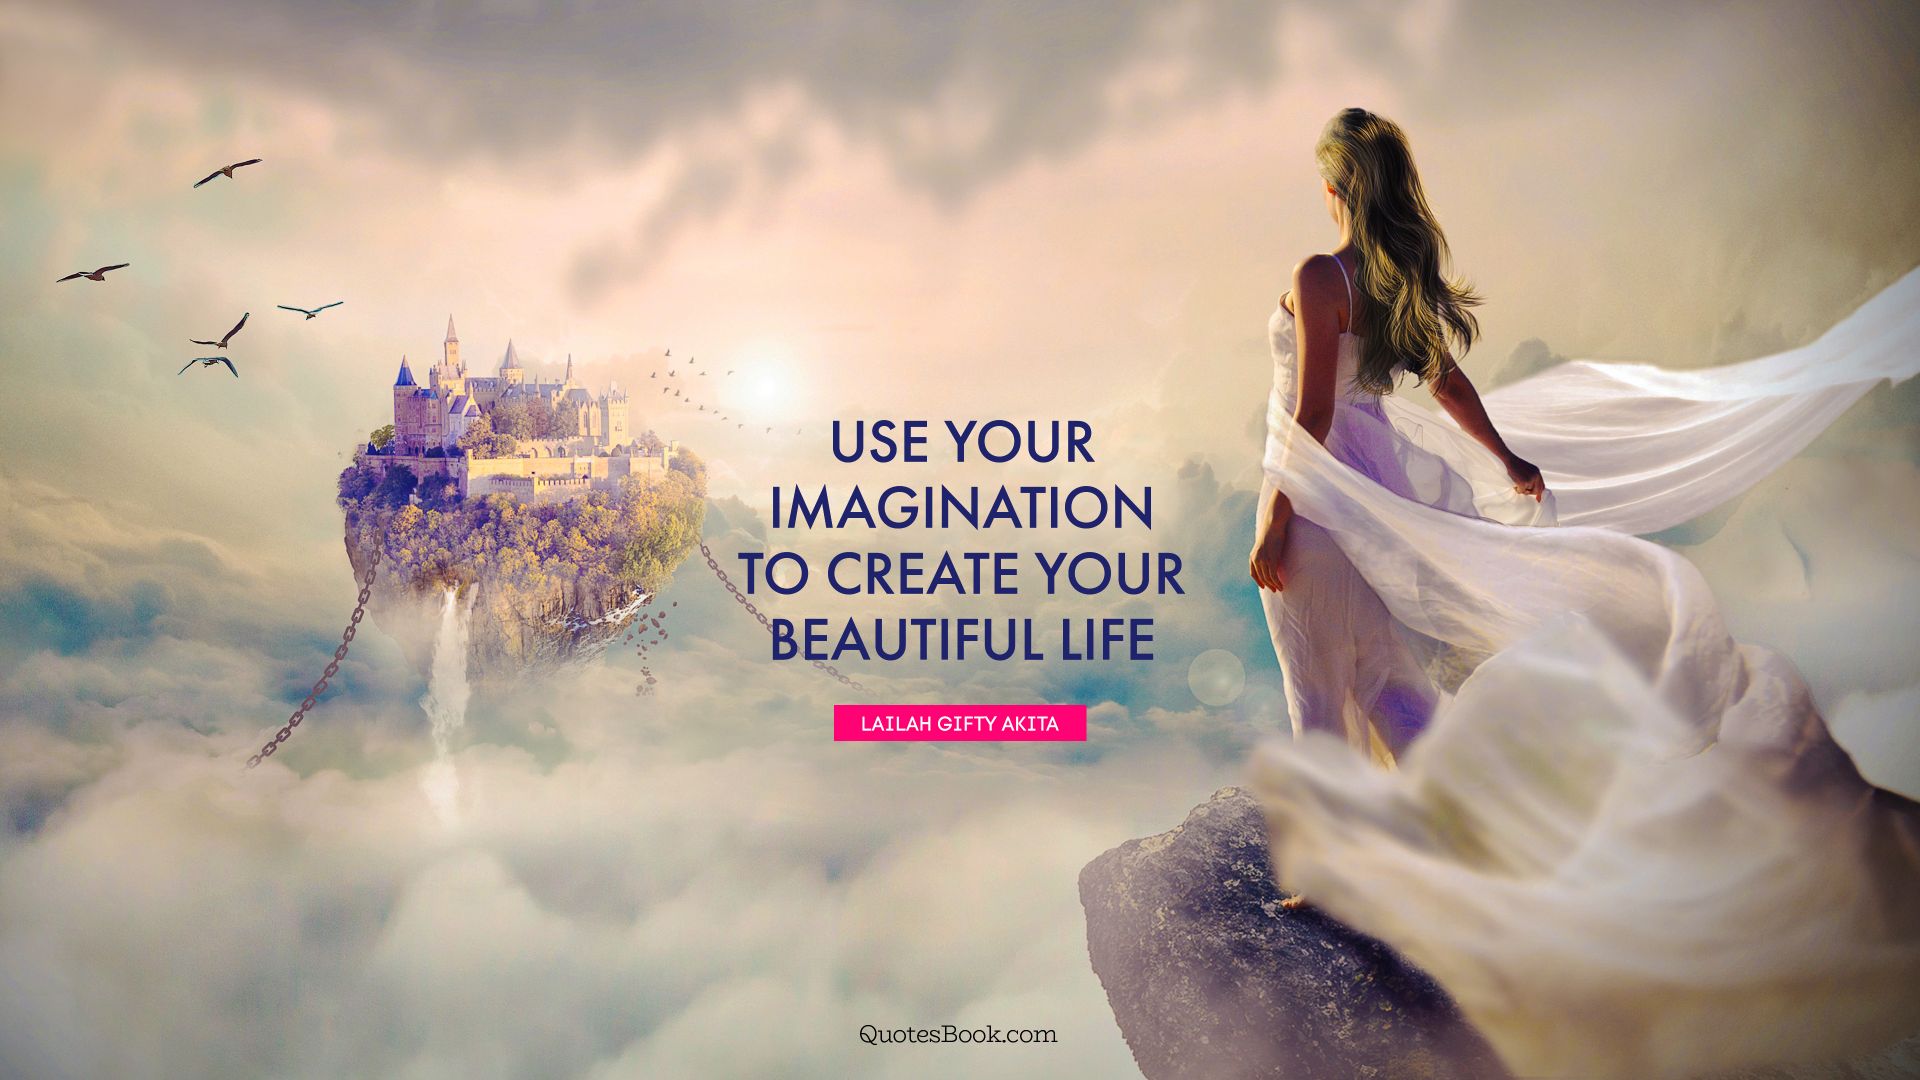 Use your imagination to create your beautiful life. - Quote by Lailah Gifty Akita